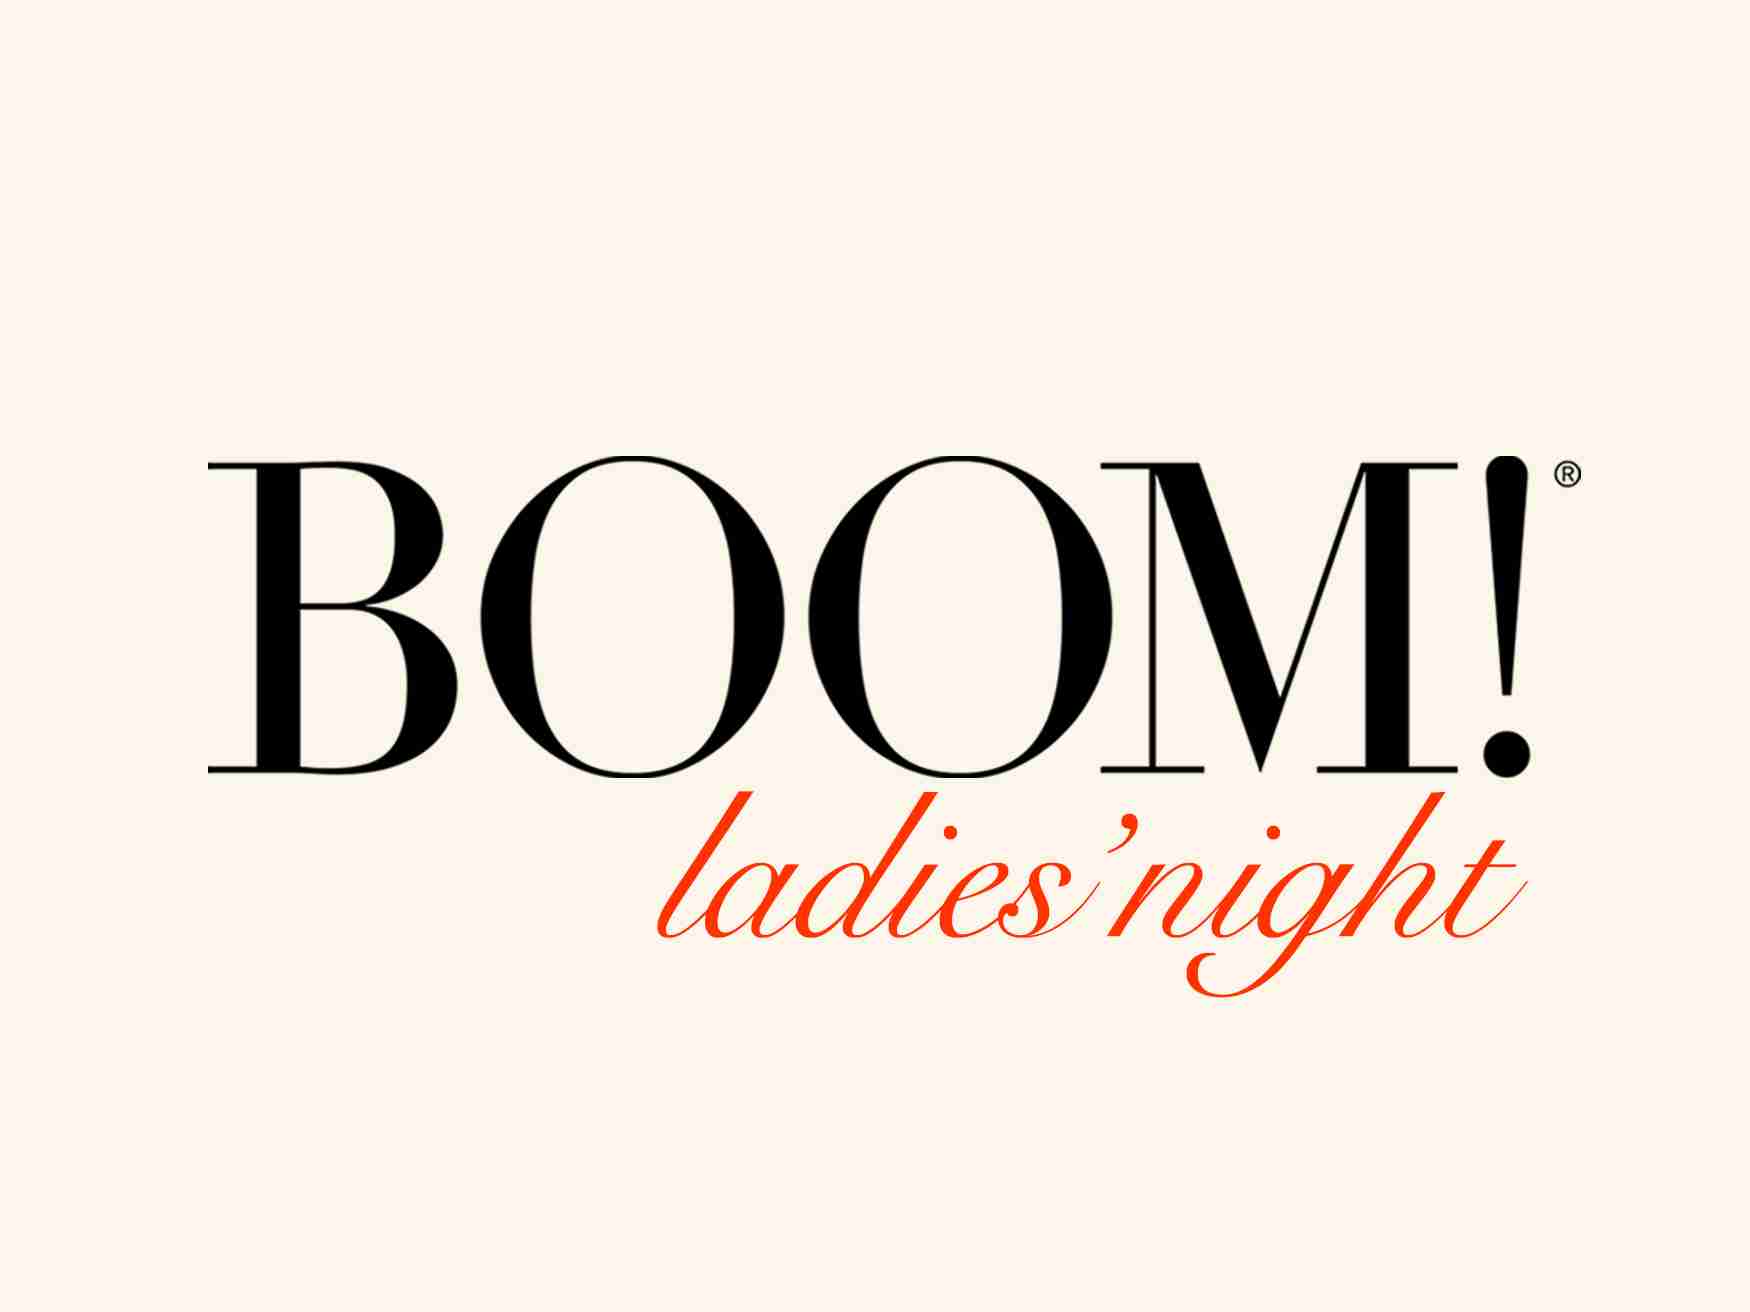 Our favorite Boom Ladies' Night moments